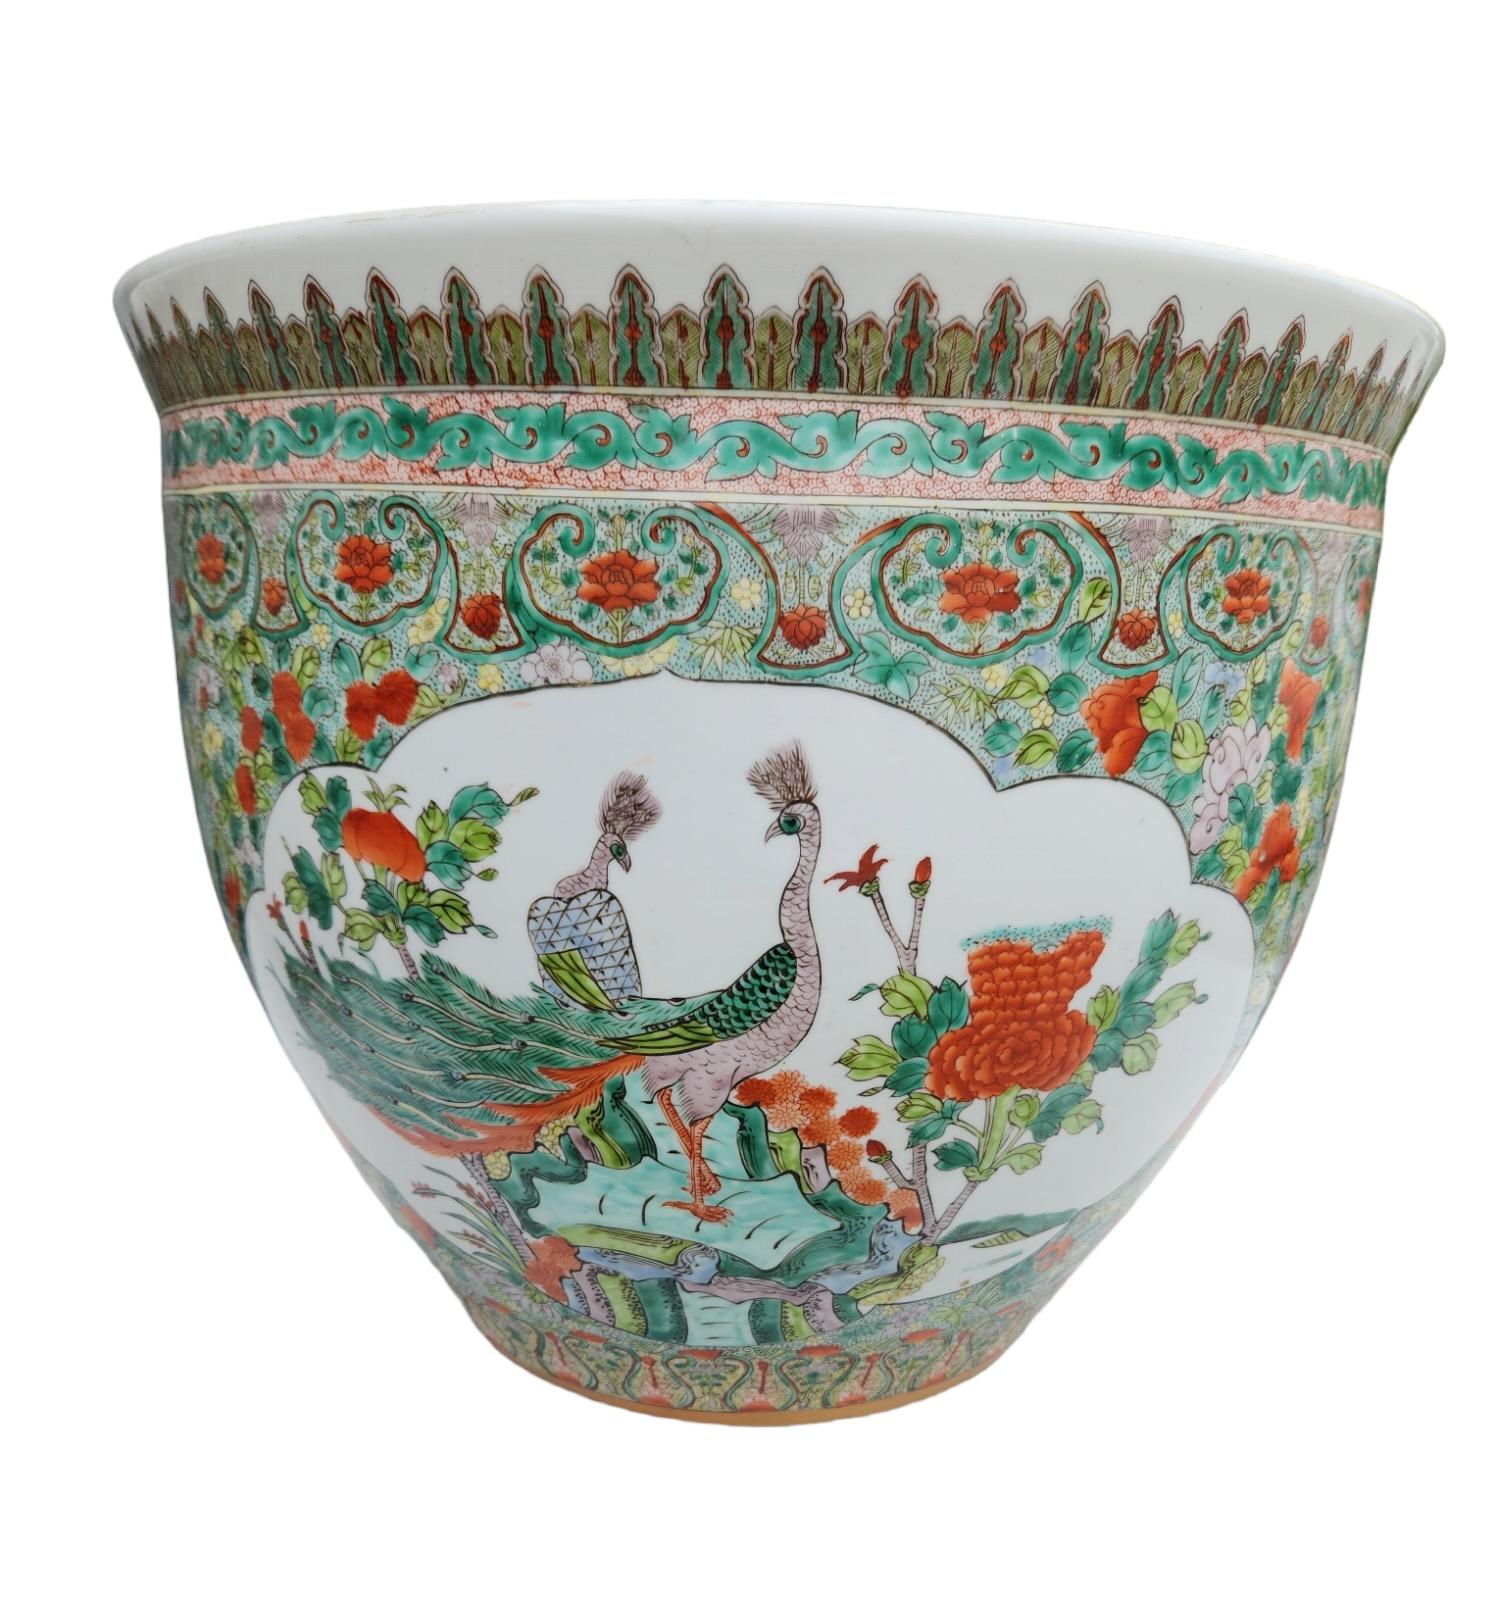 Finley hand-painted with butterfly and bird motif. No cracks or breaks. From a fine estate in Beverly Hills.